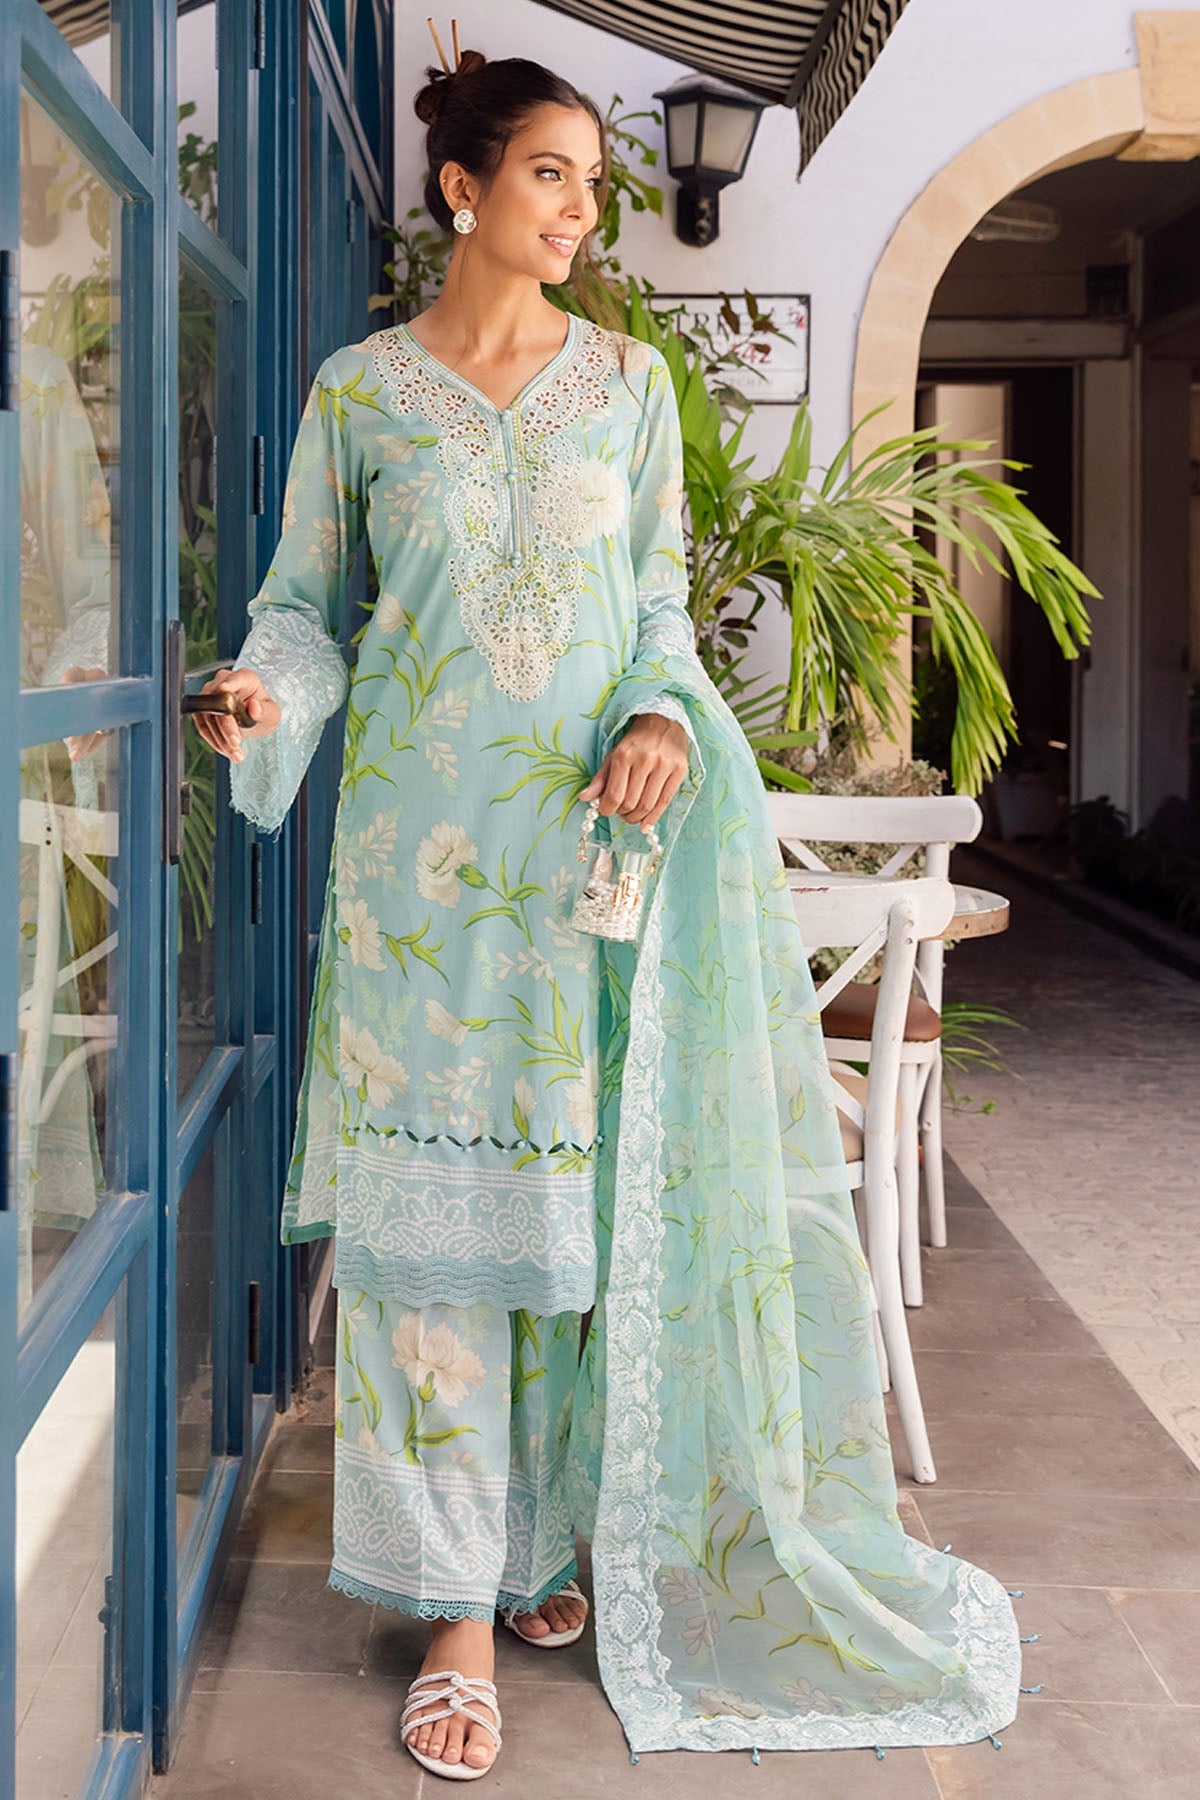 Shop Now, GL-05 - Glam Girl - Lawn Collection 2023 - Nureh - Shahana Collection UK - Wedding and Bridal Party Dresses - Eid edit 2023